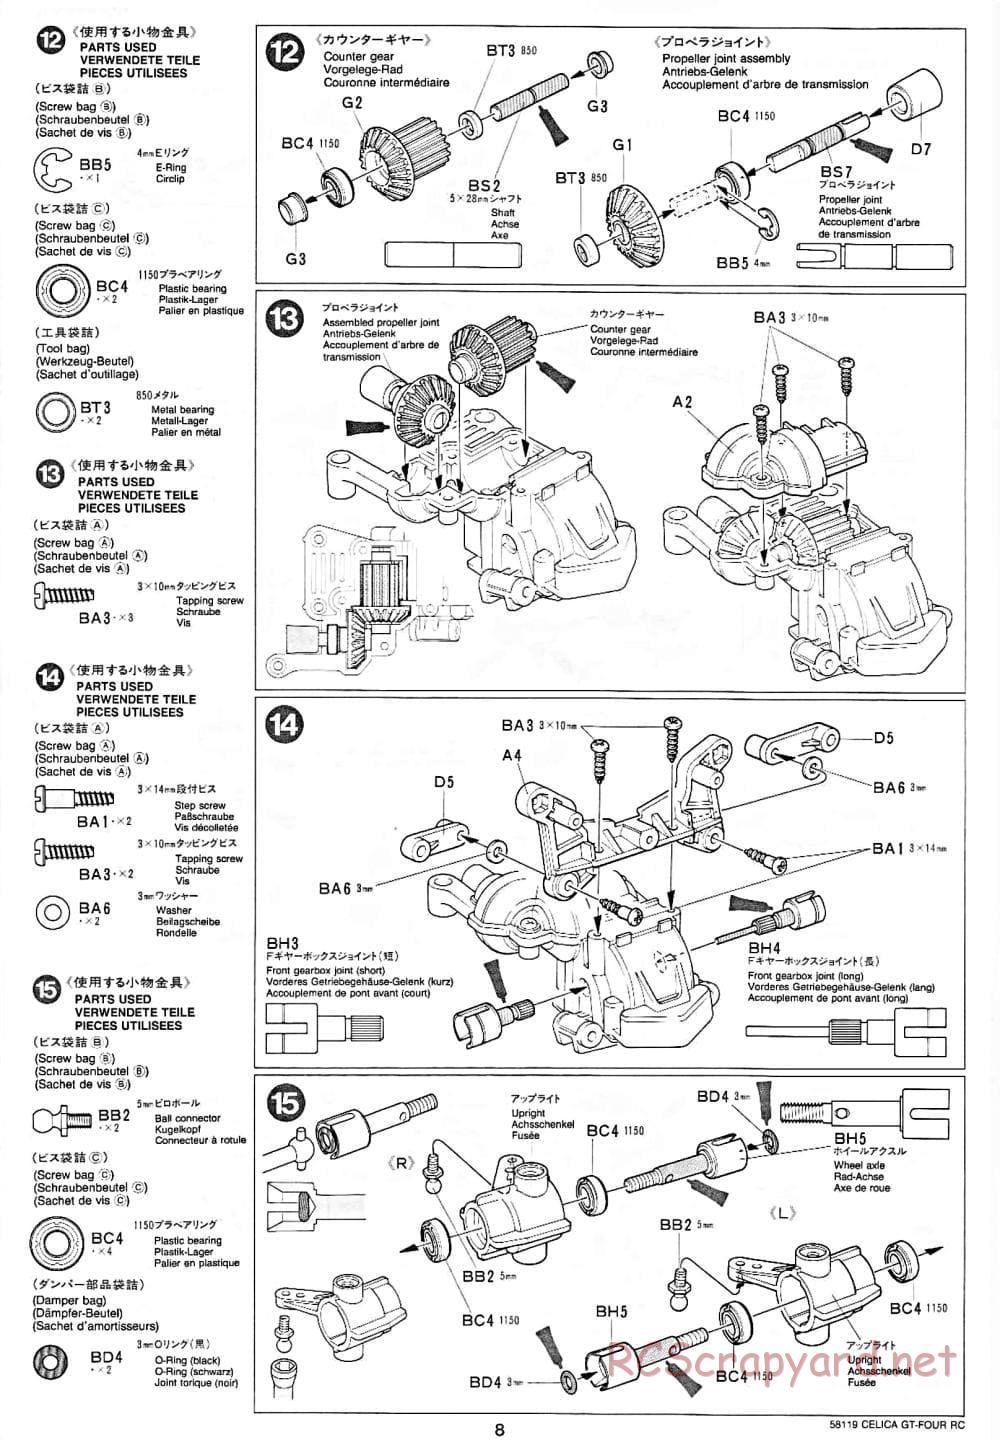 Tamiya - Toyota Celica GT-Four RC - TA-01 Chassis - Manual - Page 8